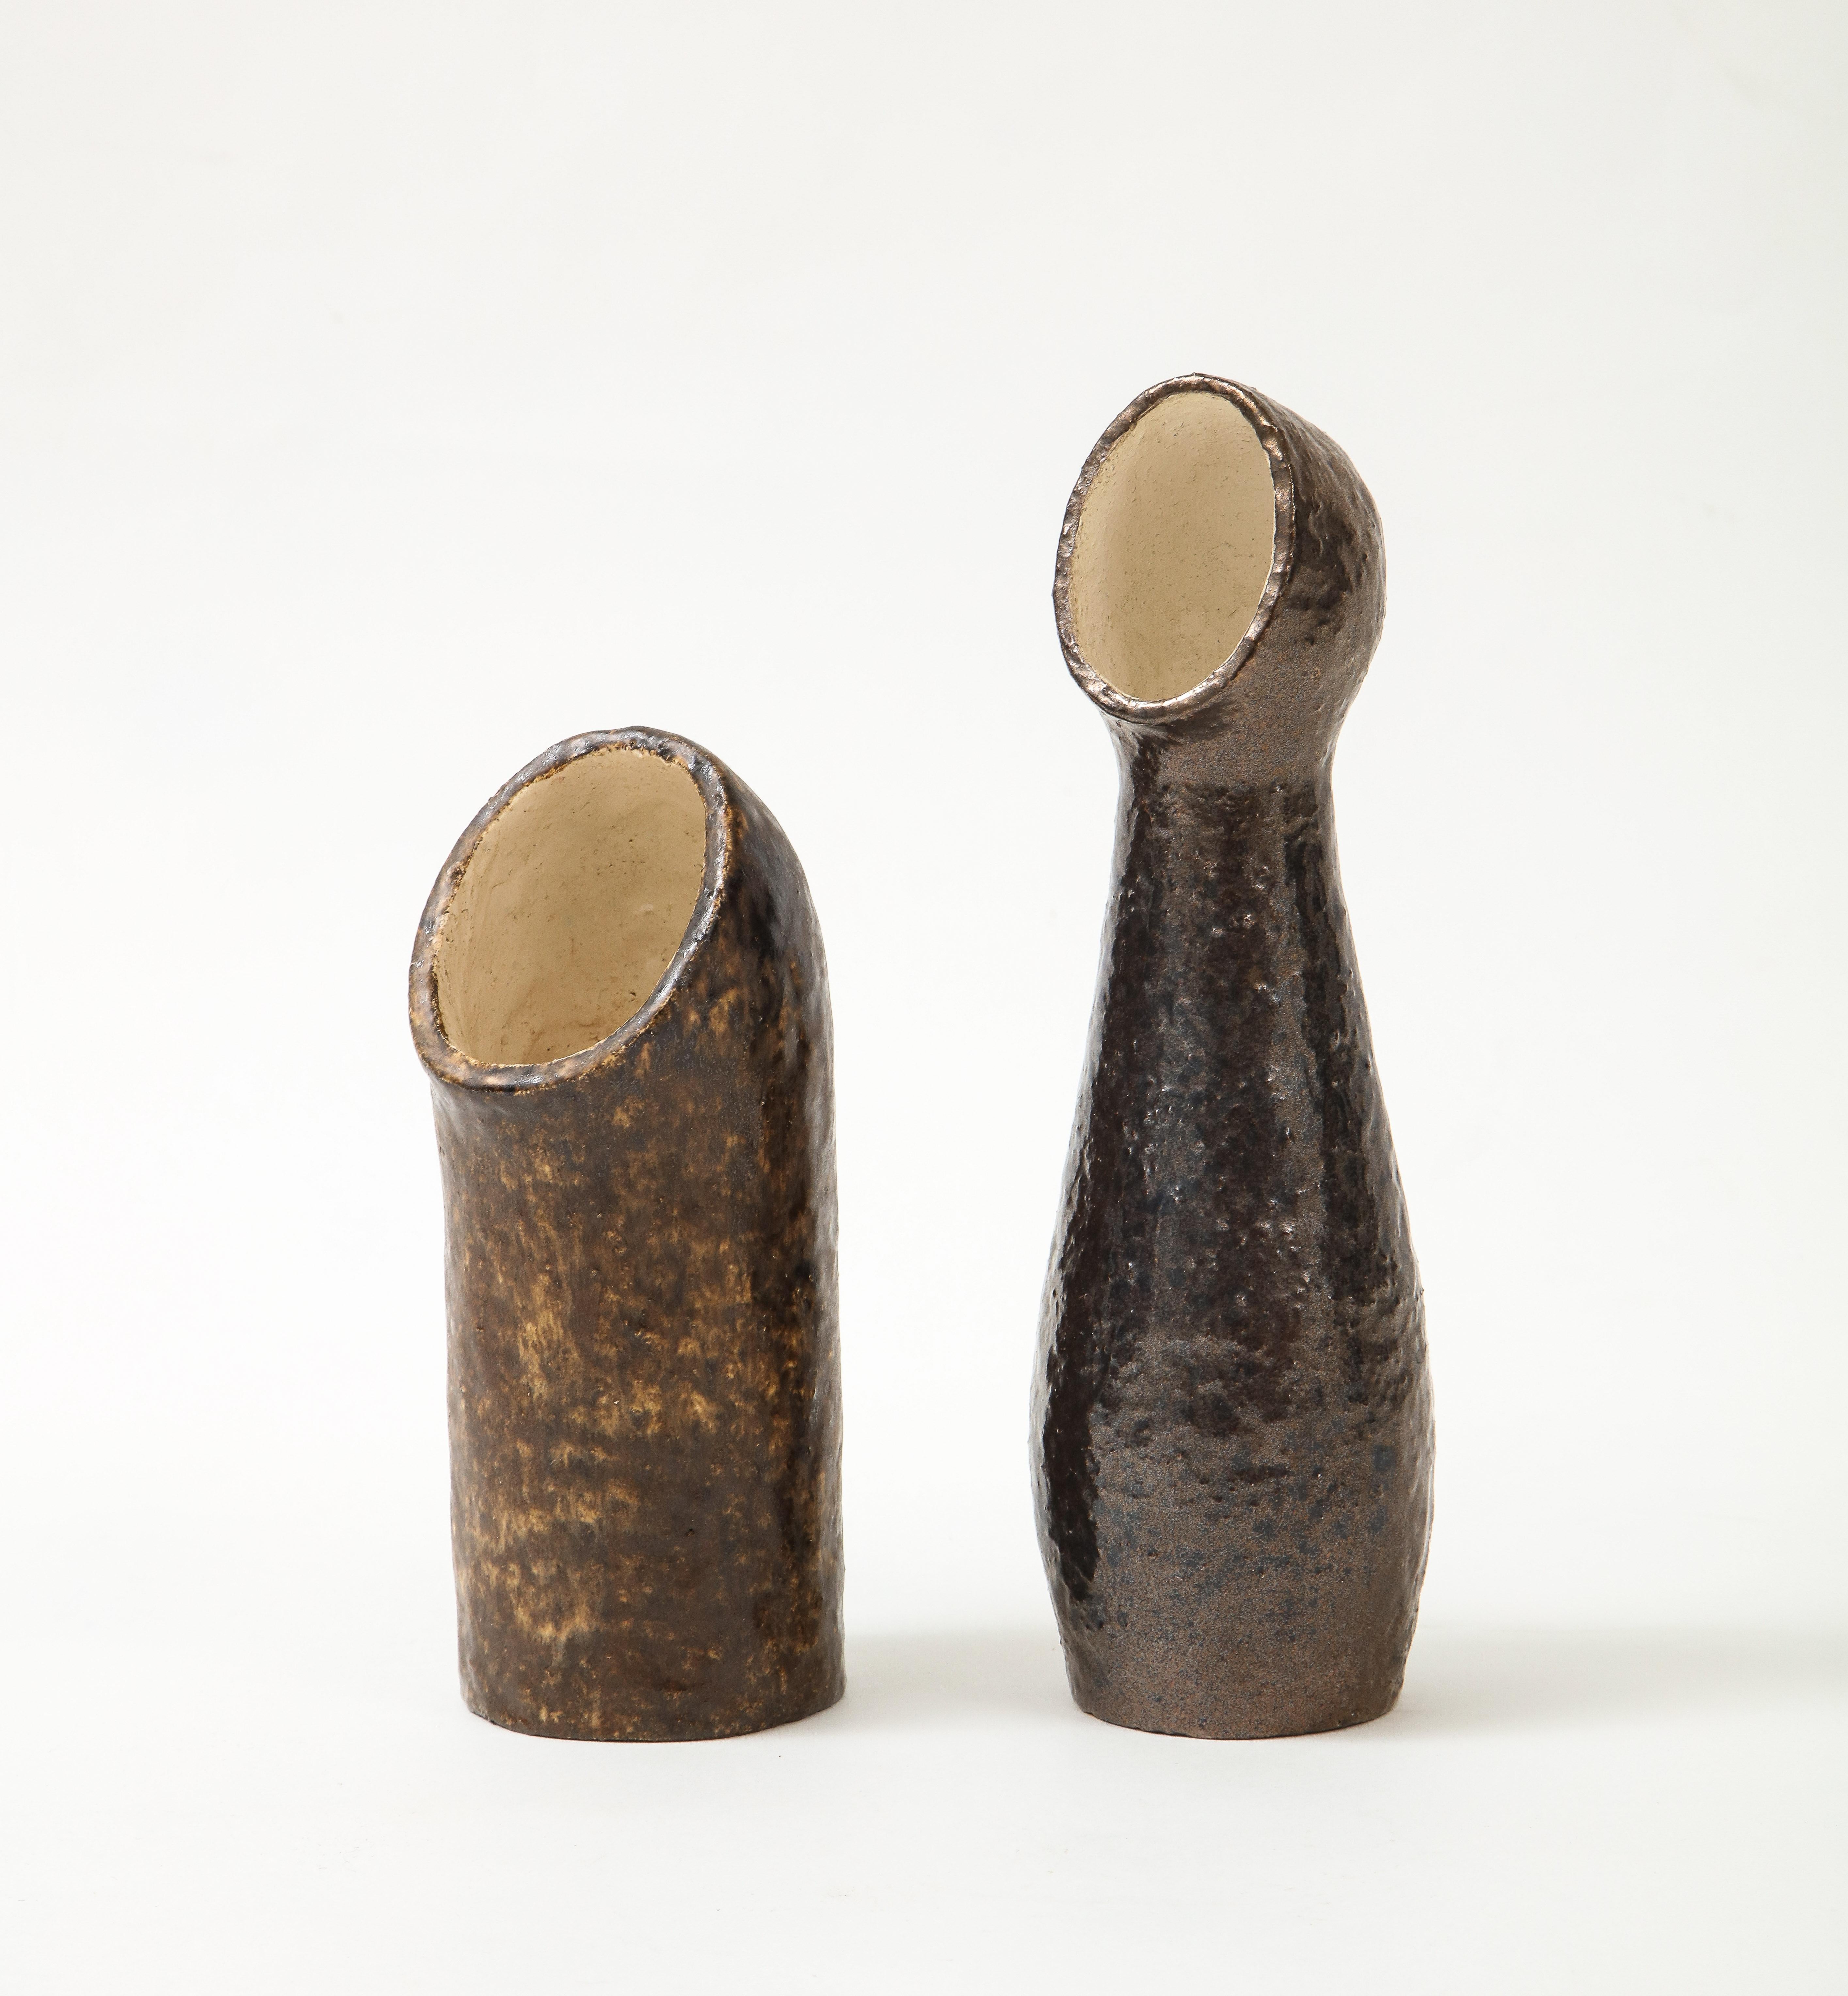 Pair of sculptural ceramic vases in the style of borderie, 1960's, the Netherlands, signed: índecipherable'
Measures: Height 7.5, 10 diameter 2.5 in.